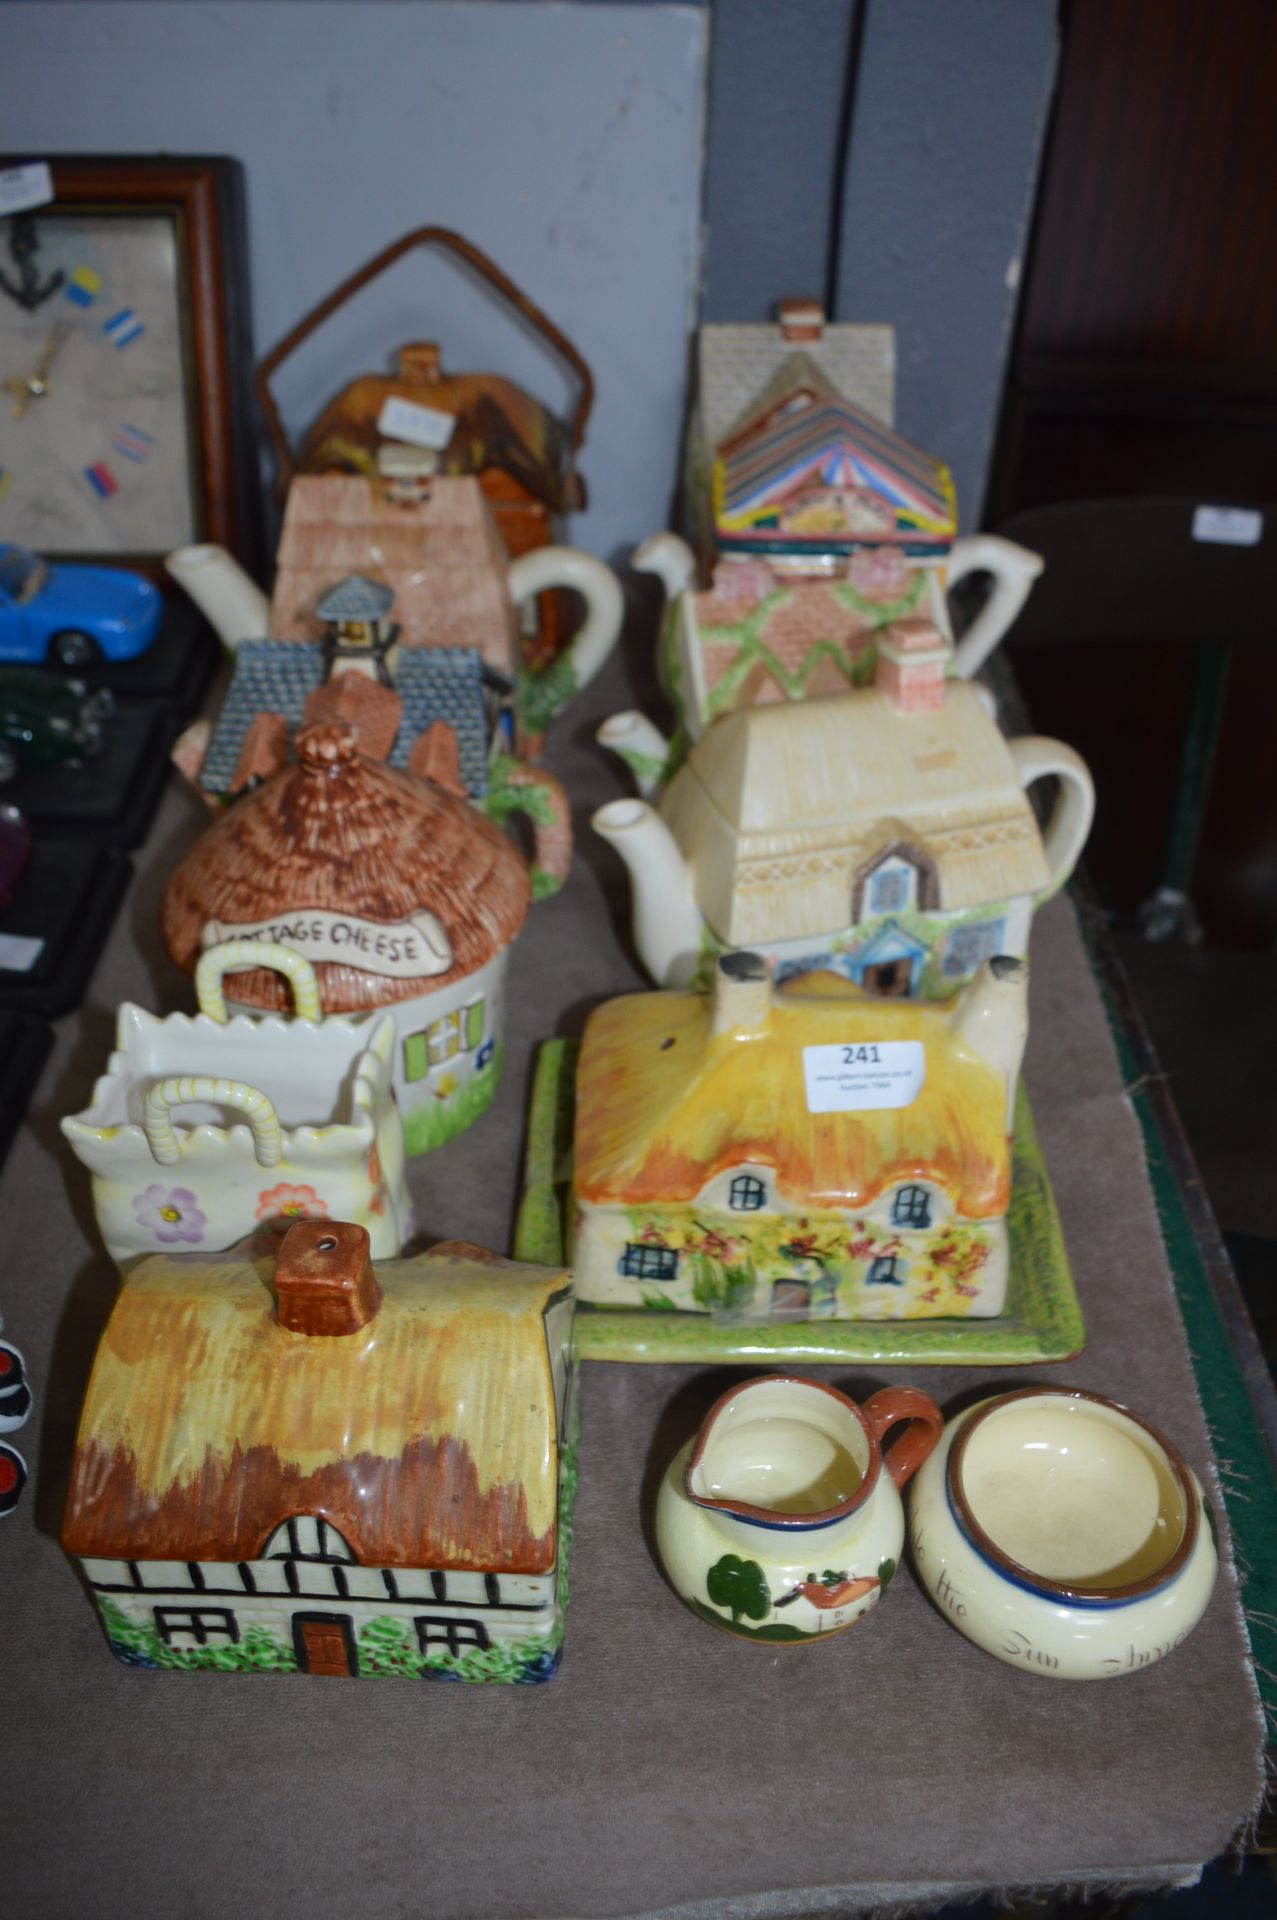 *Selection of Decorative Teapots, Butter Dishes, etc.